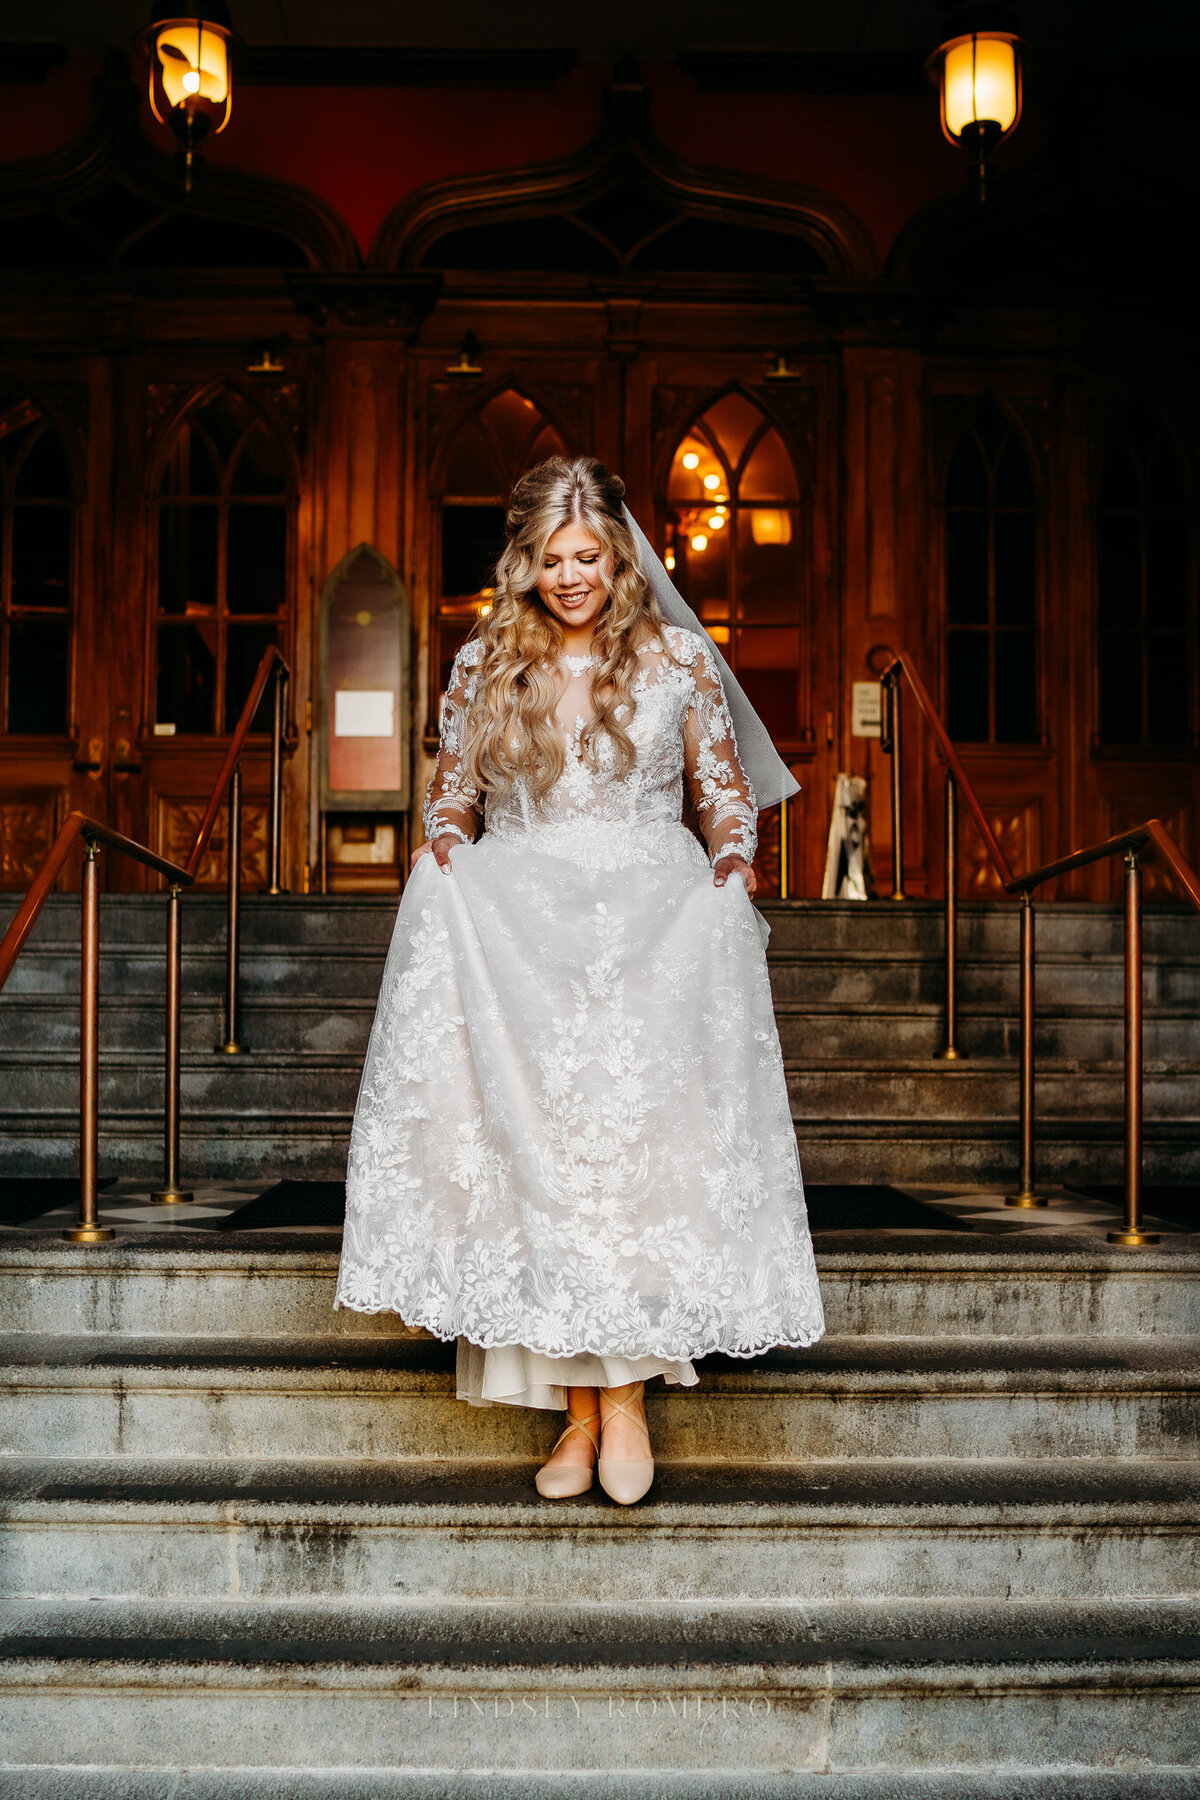 candid photo of bridal pose at old state capital in baton rouge, louisiana